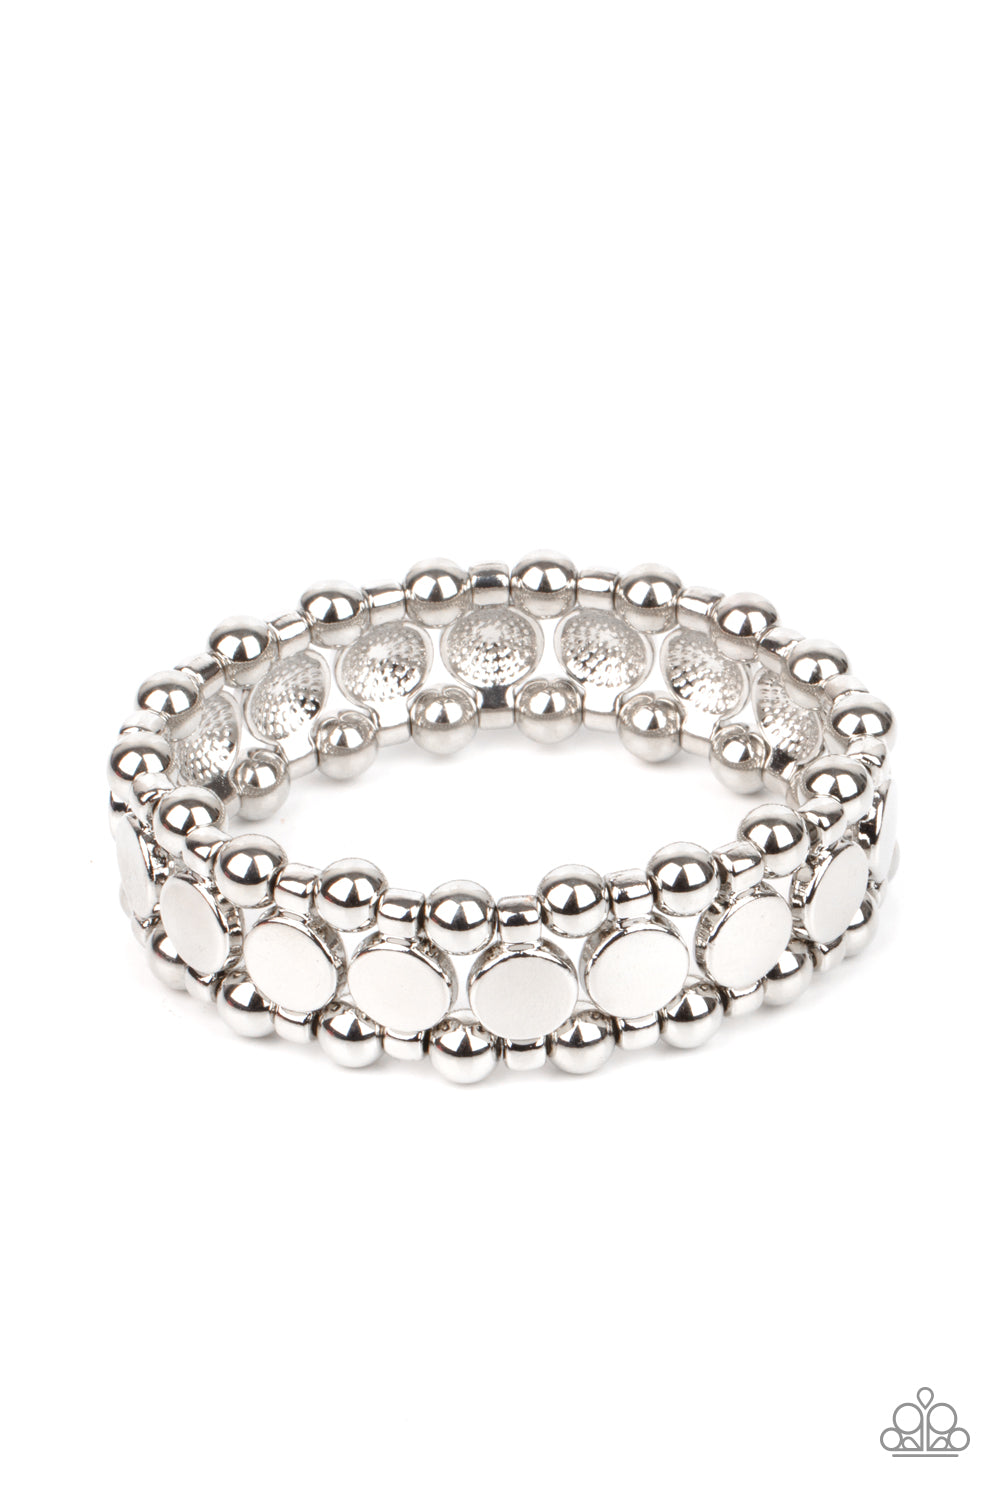 Shiny silver disc fittings and pairs of classic silver beads are threaded along stretchy bands